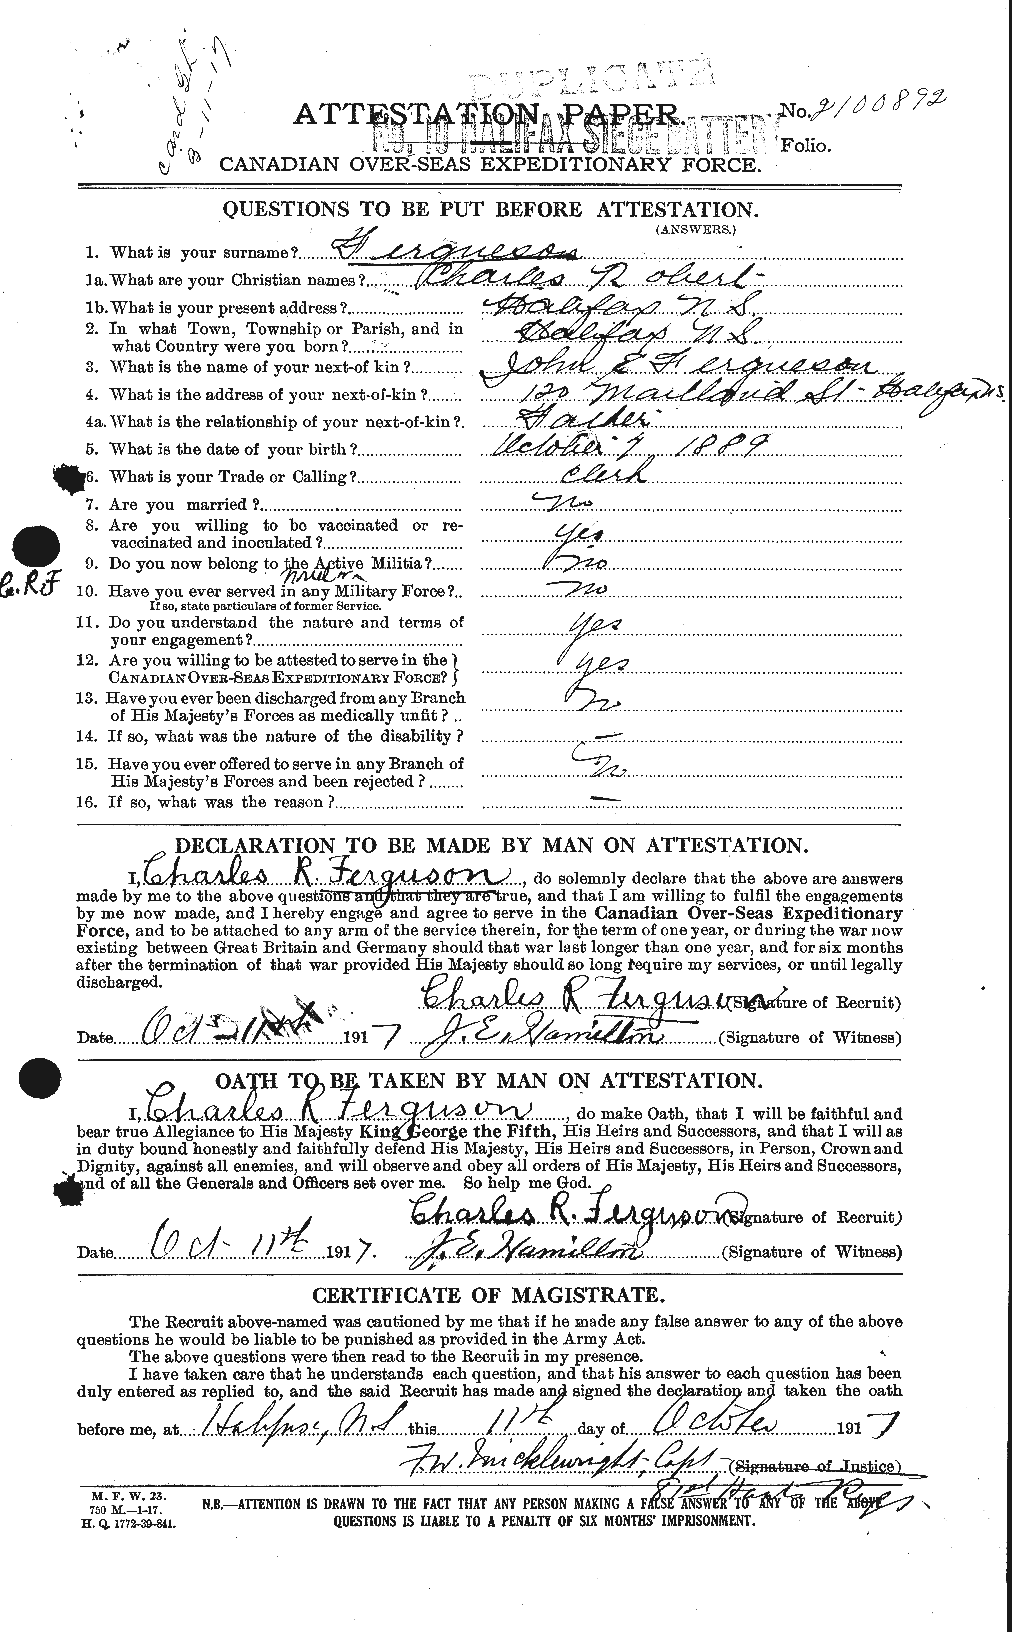 Personnel Records of the First World War - CEF 318946a